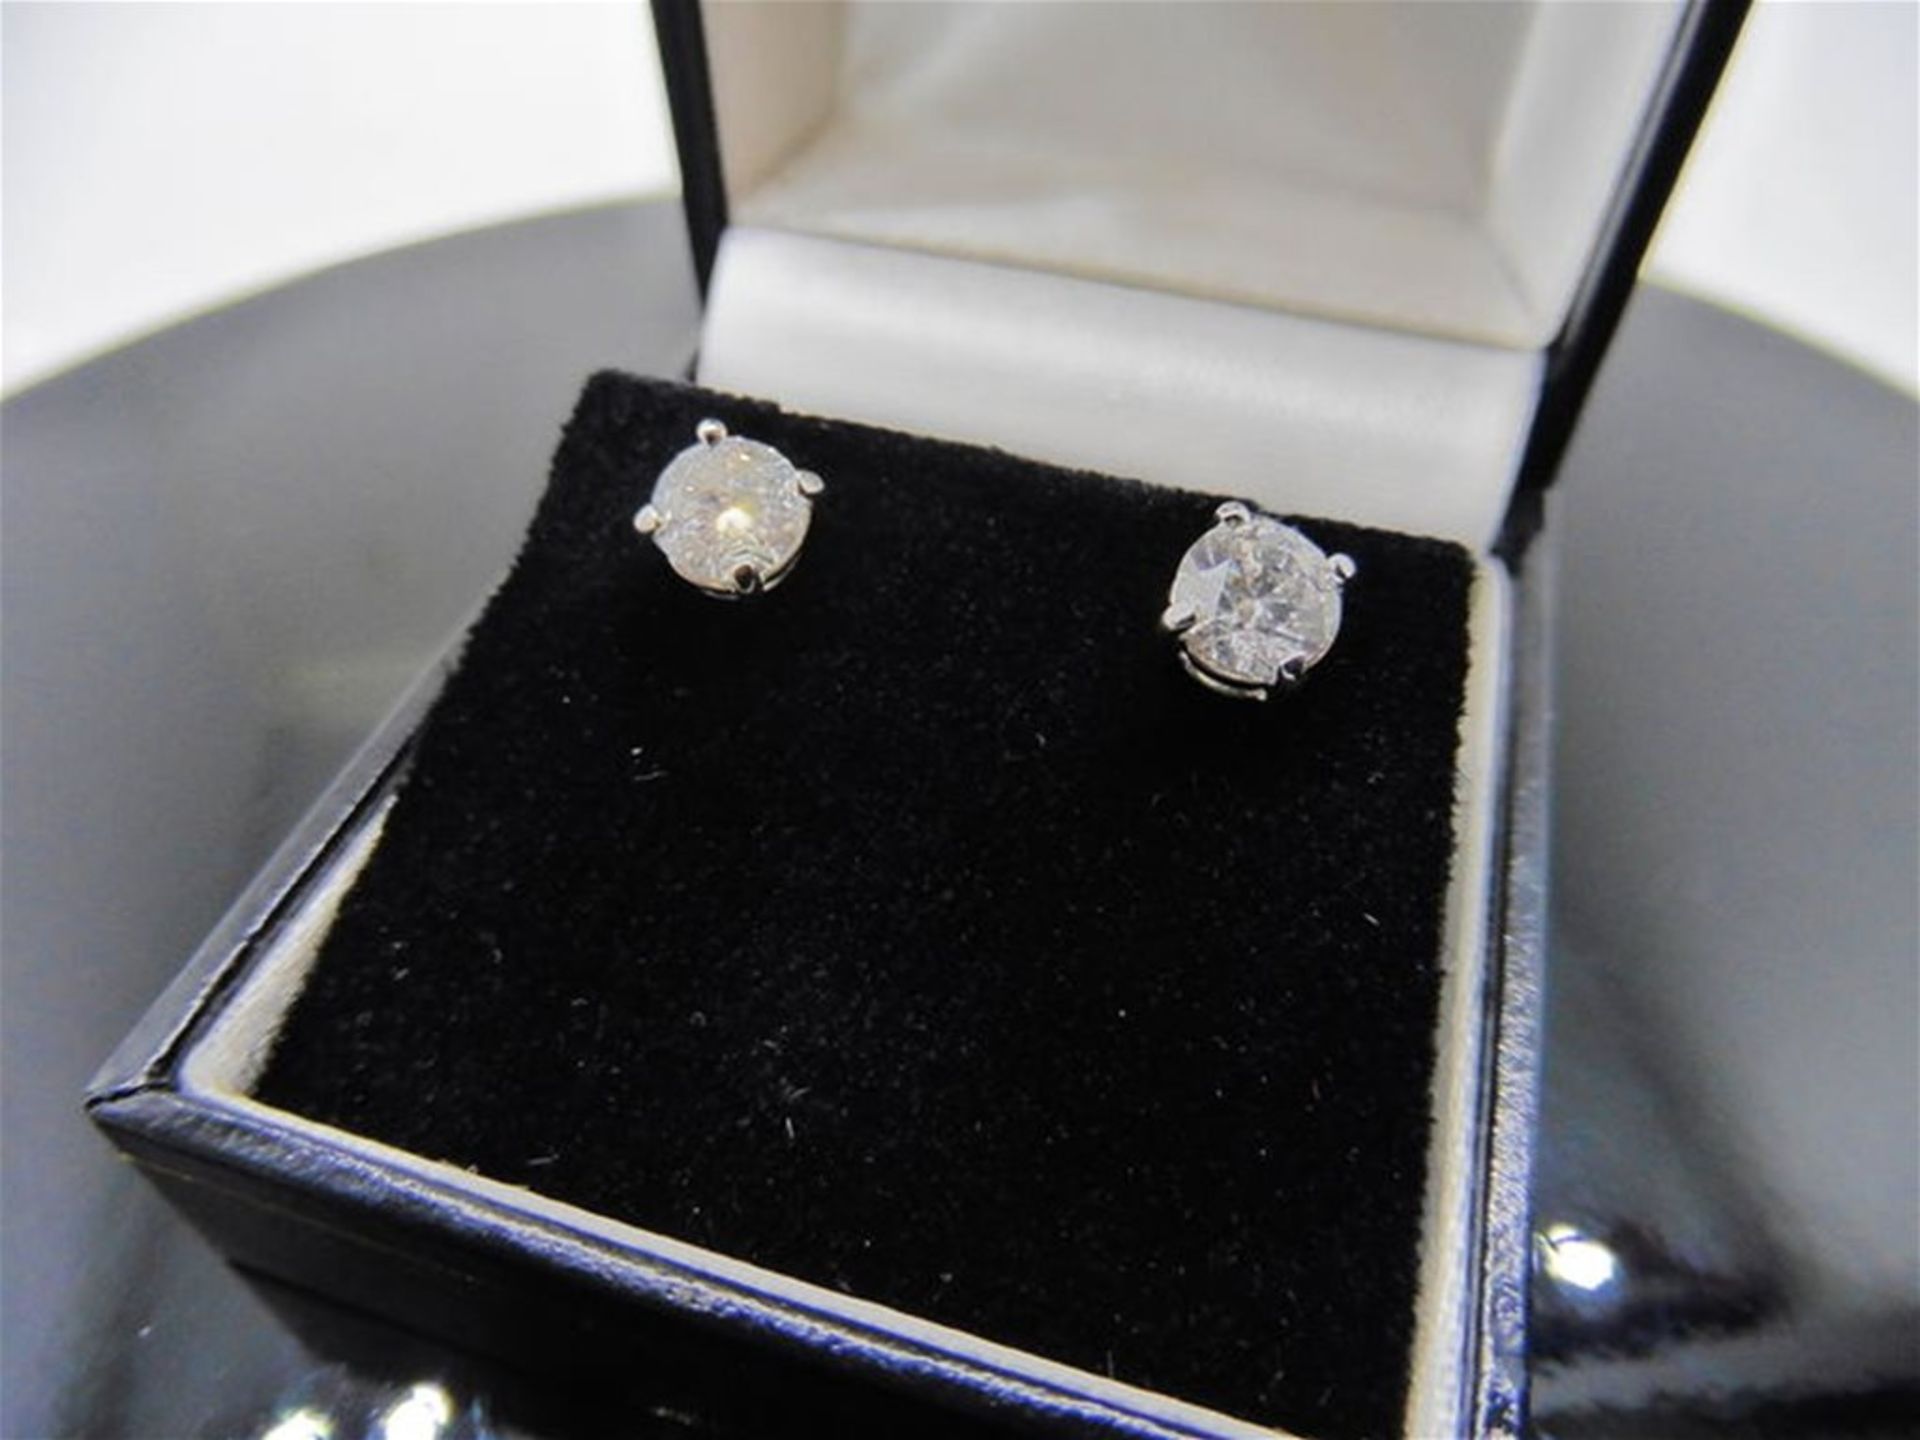 2ct diamond solitaire earrings. Each with a 1ct enhanced brilliant cut diamond, G/H colour - Image 3 of 3